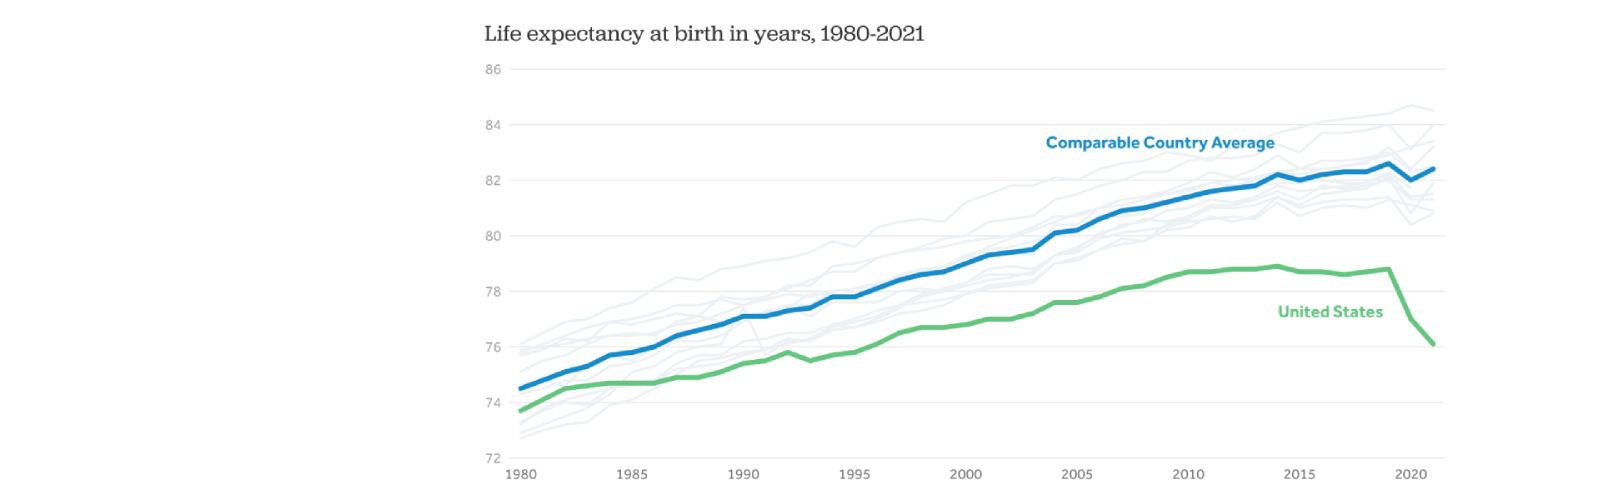 life expectancy at birth